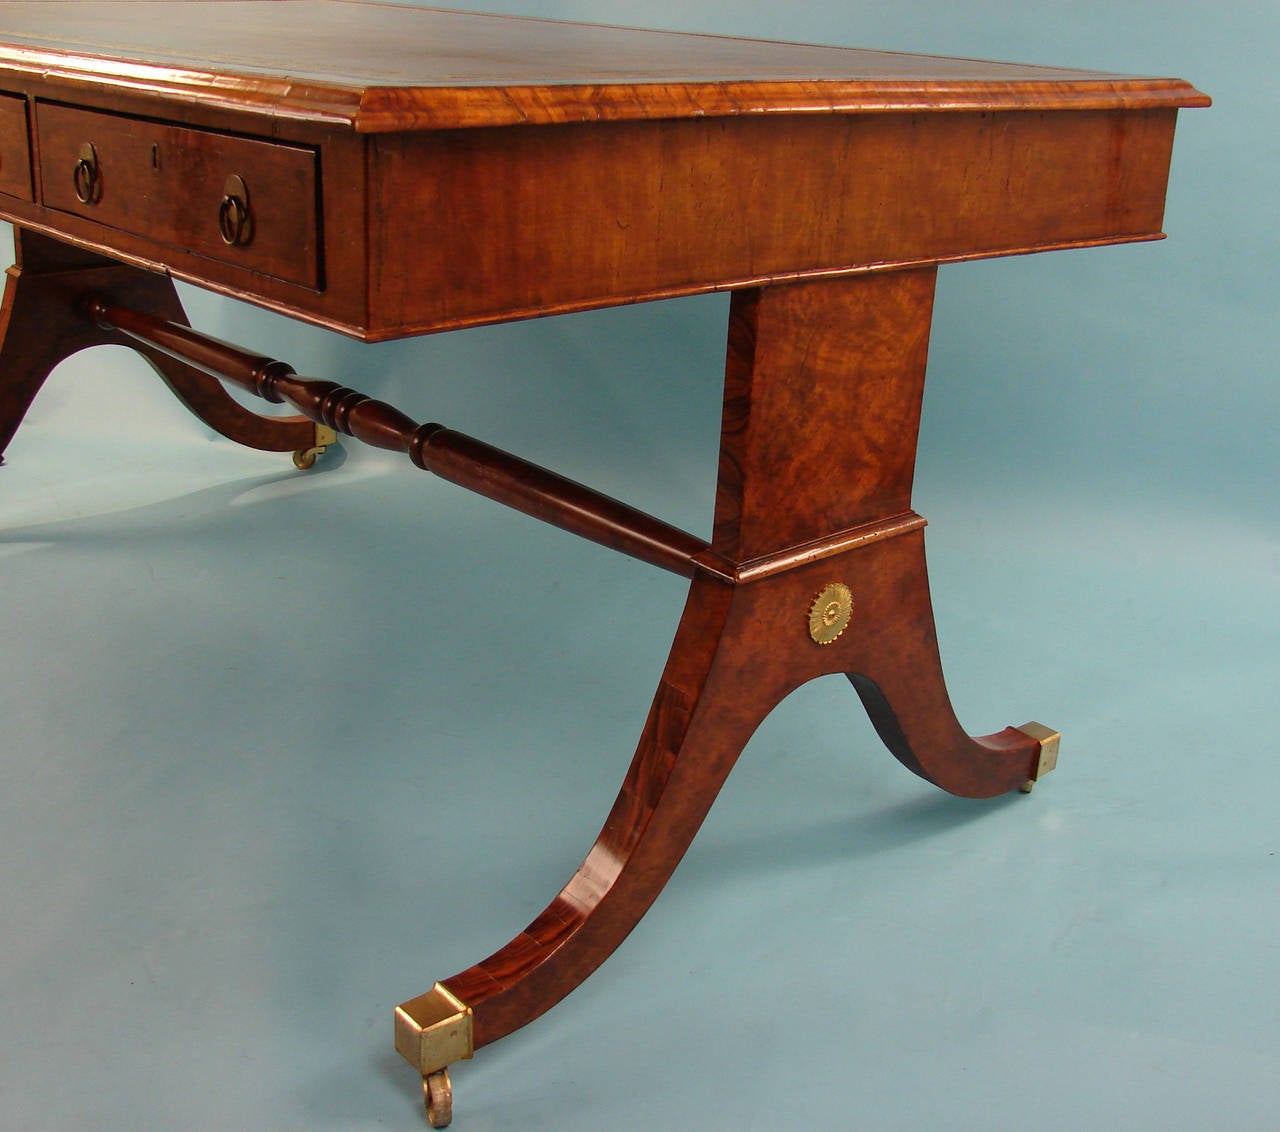 A handsome English burl walnut partners writing table, the gilt-tooled tan leather top above 6 functional frieze drawers, 3 on each side, supported by downswept legs joined by a turned stretcher ending in box casters. Circa 1820.